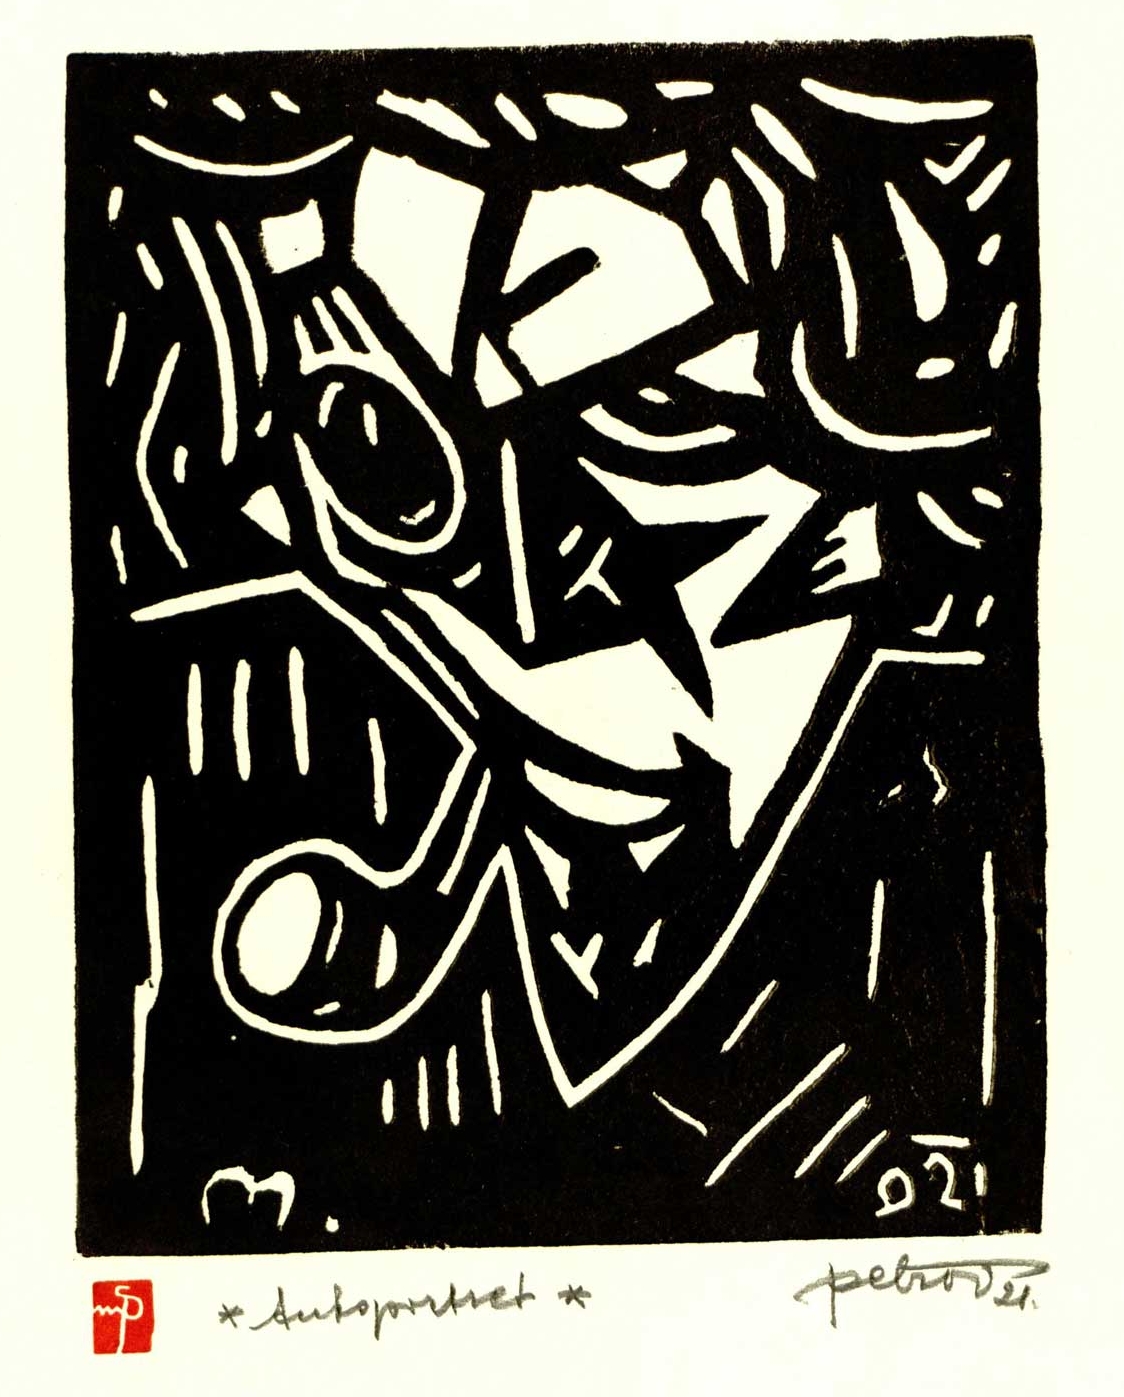 abstract self portrait by Michael S. Peter, Serbia 1921